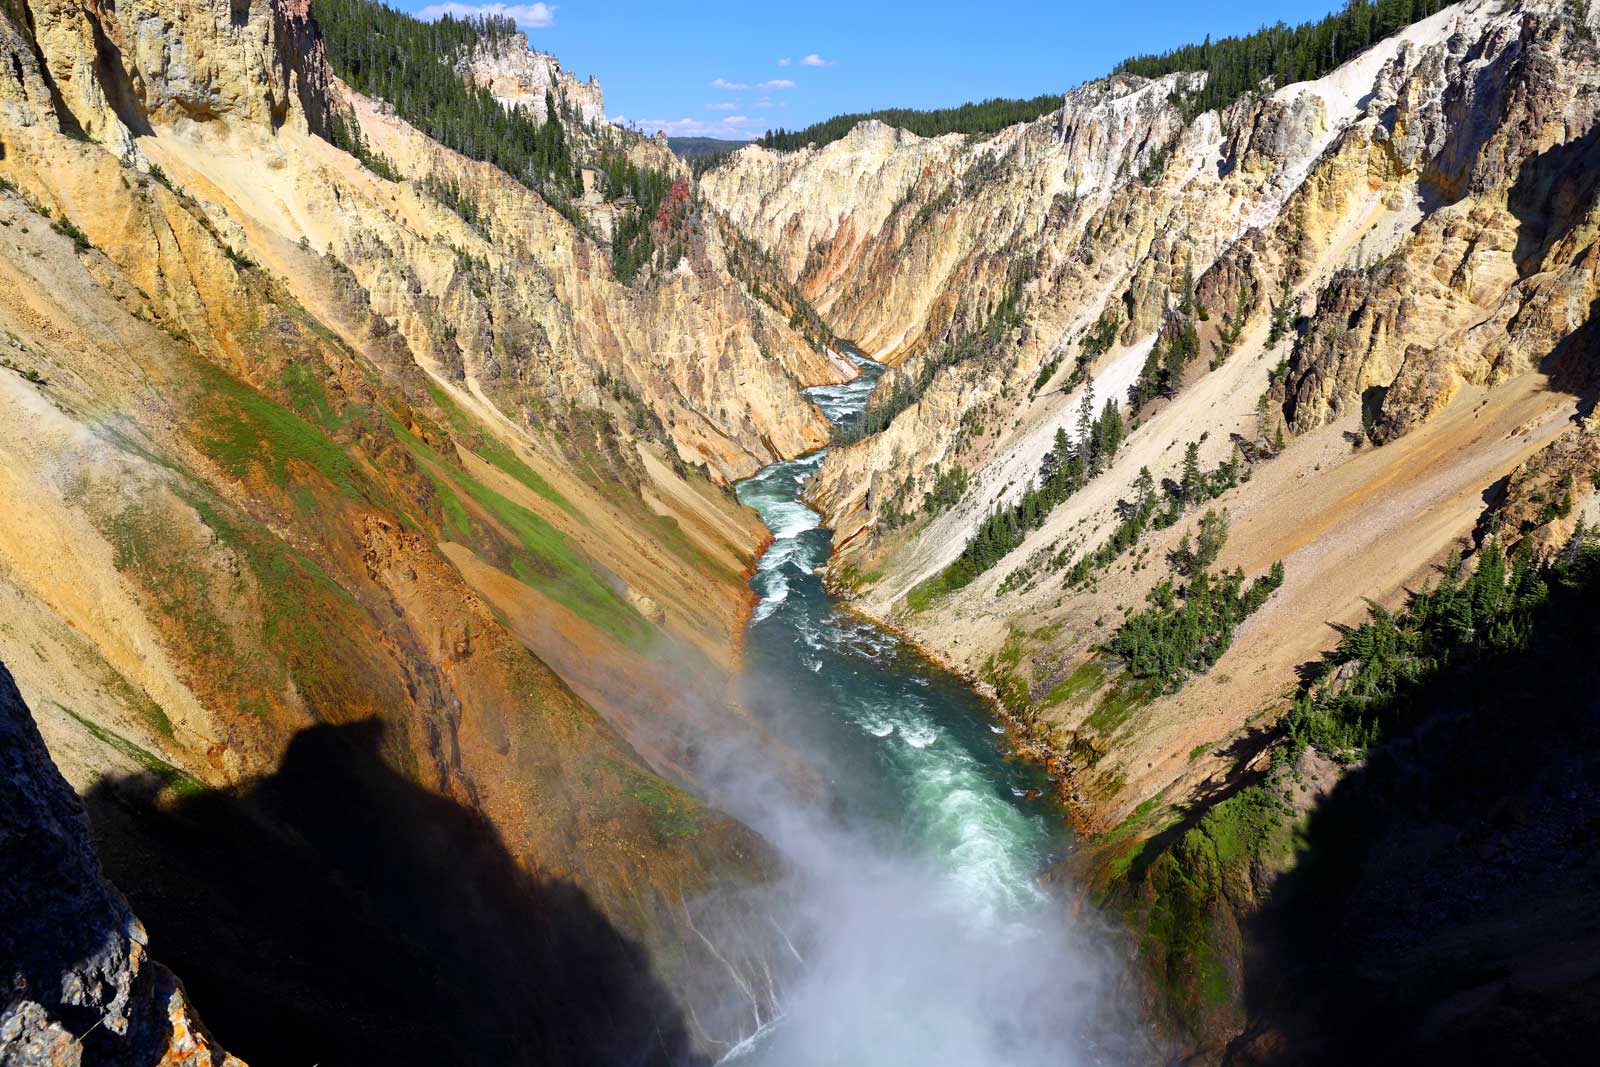 Brink of Lower Falls hiking Trail in Yellowstone